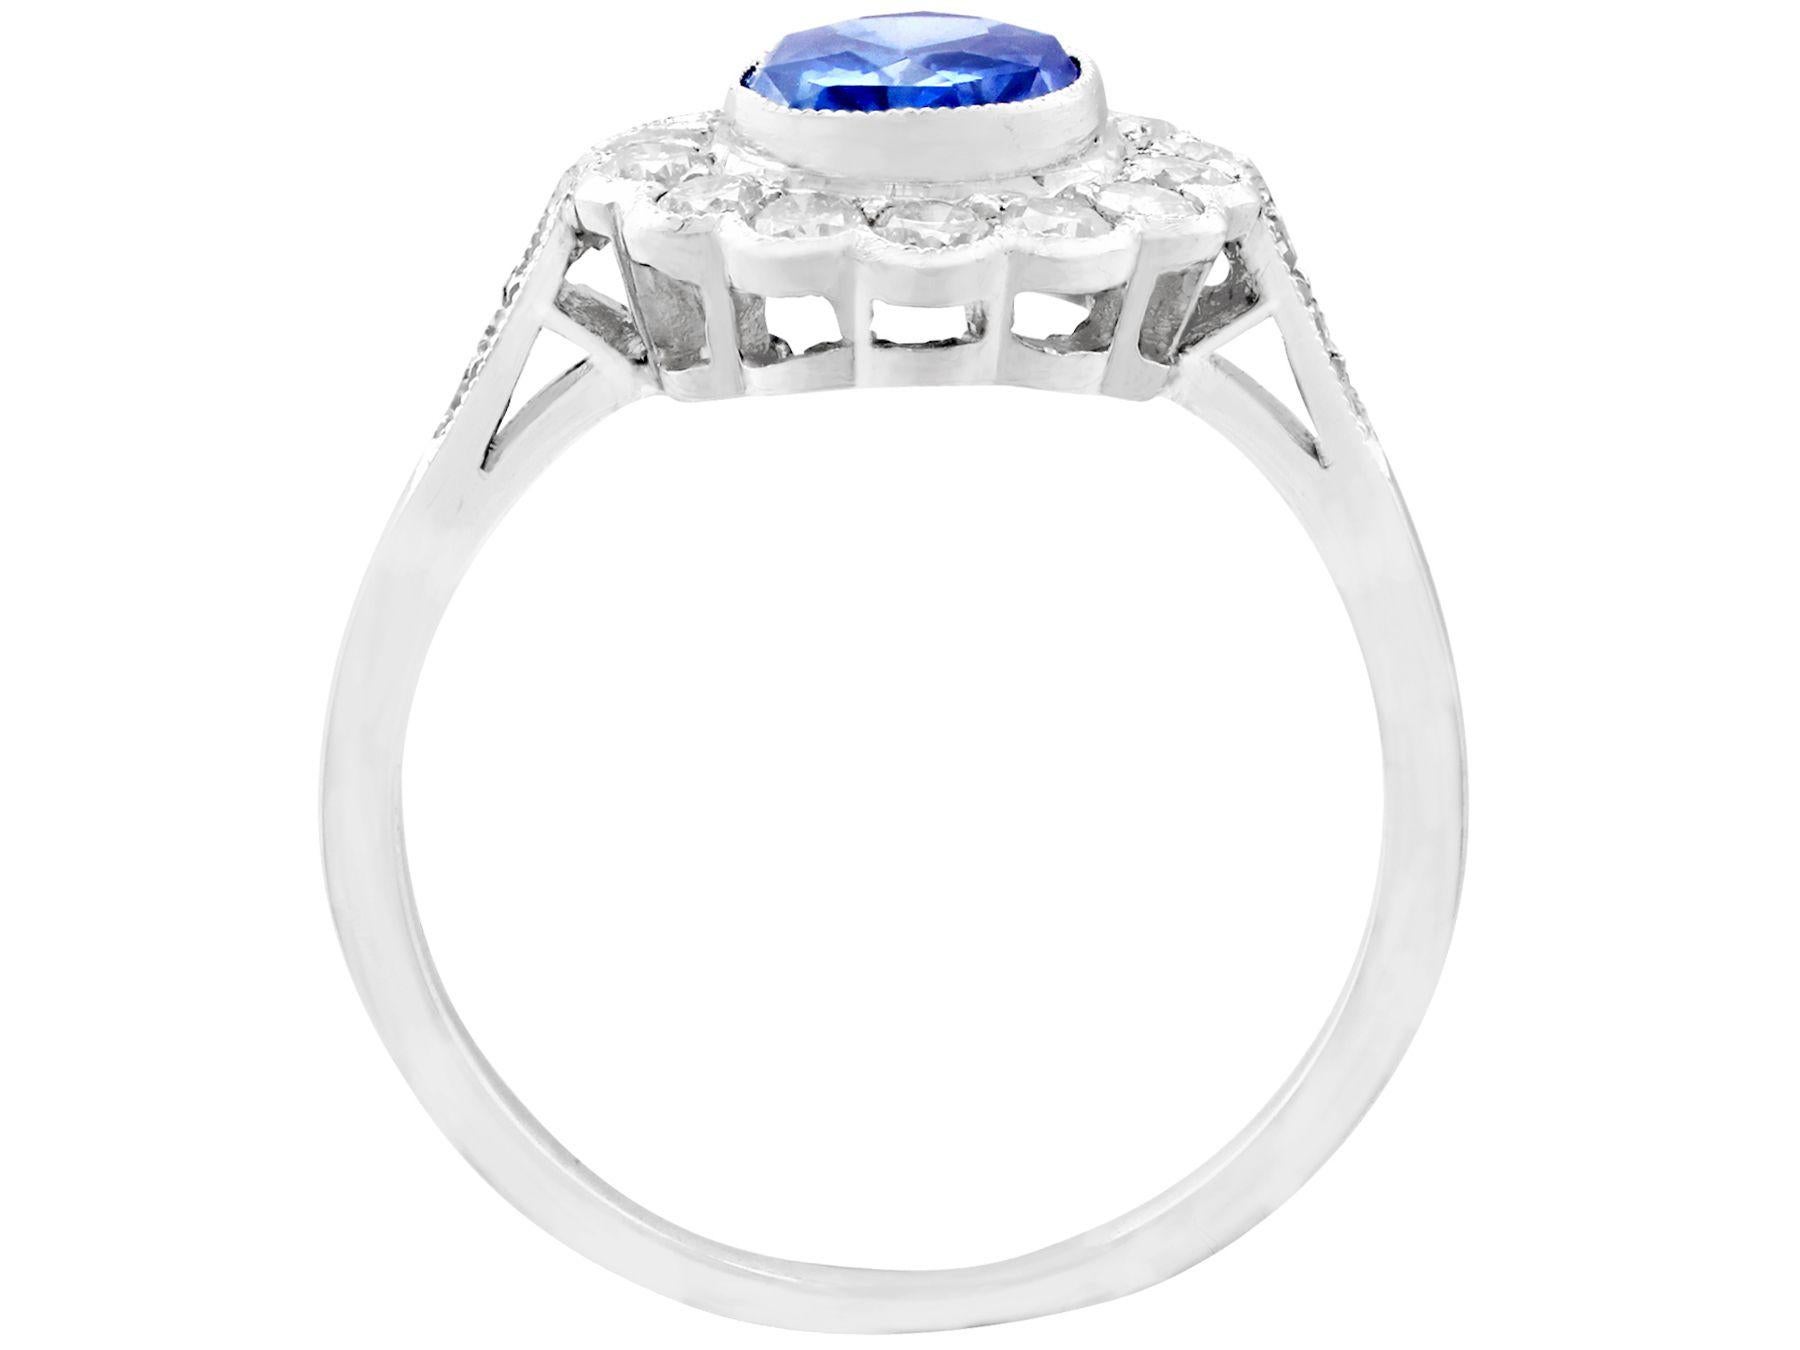 1960s 1.29 Carat Sapphire and Diamond Platinum Cocktail Ring In Excellent Condition For Sale In Jesmond, Newcastle Upon Tyne